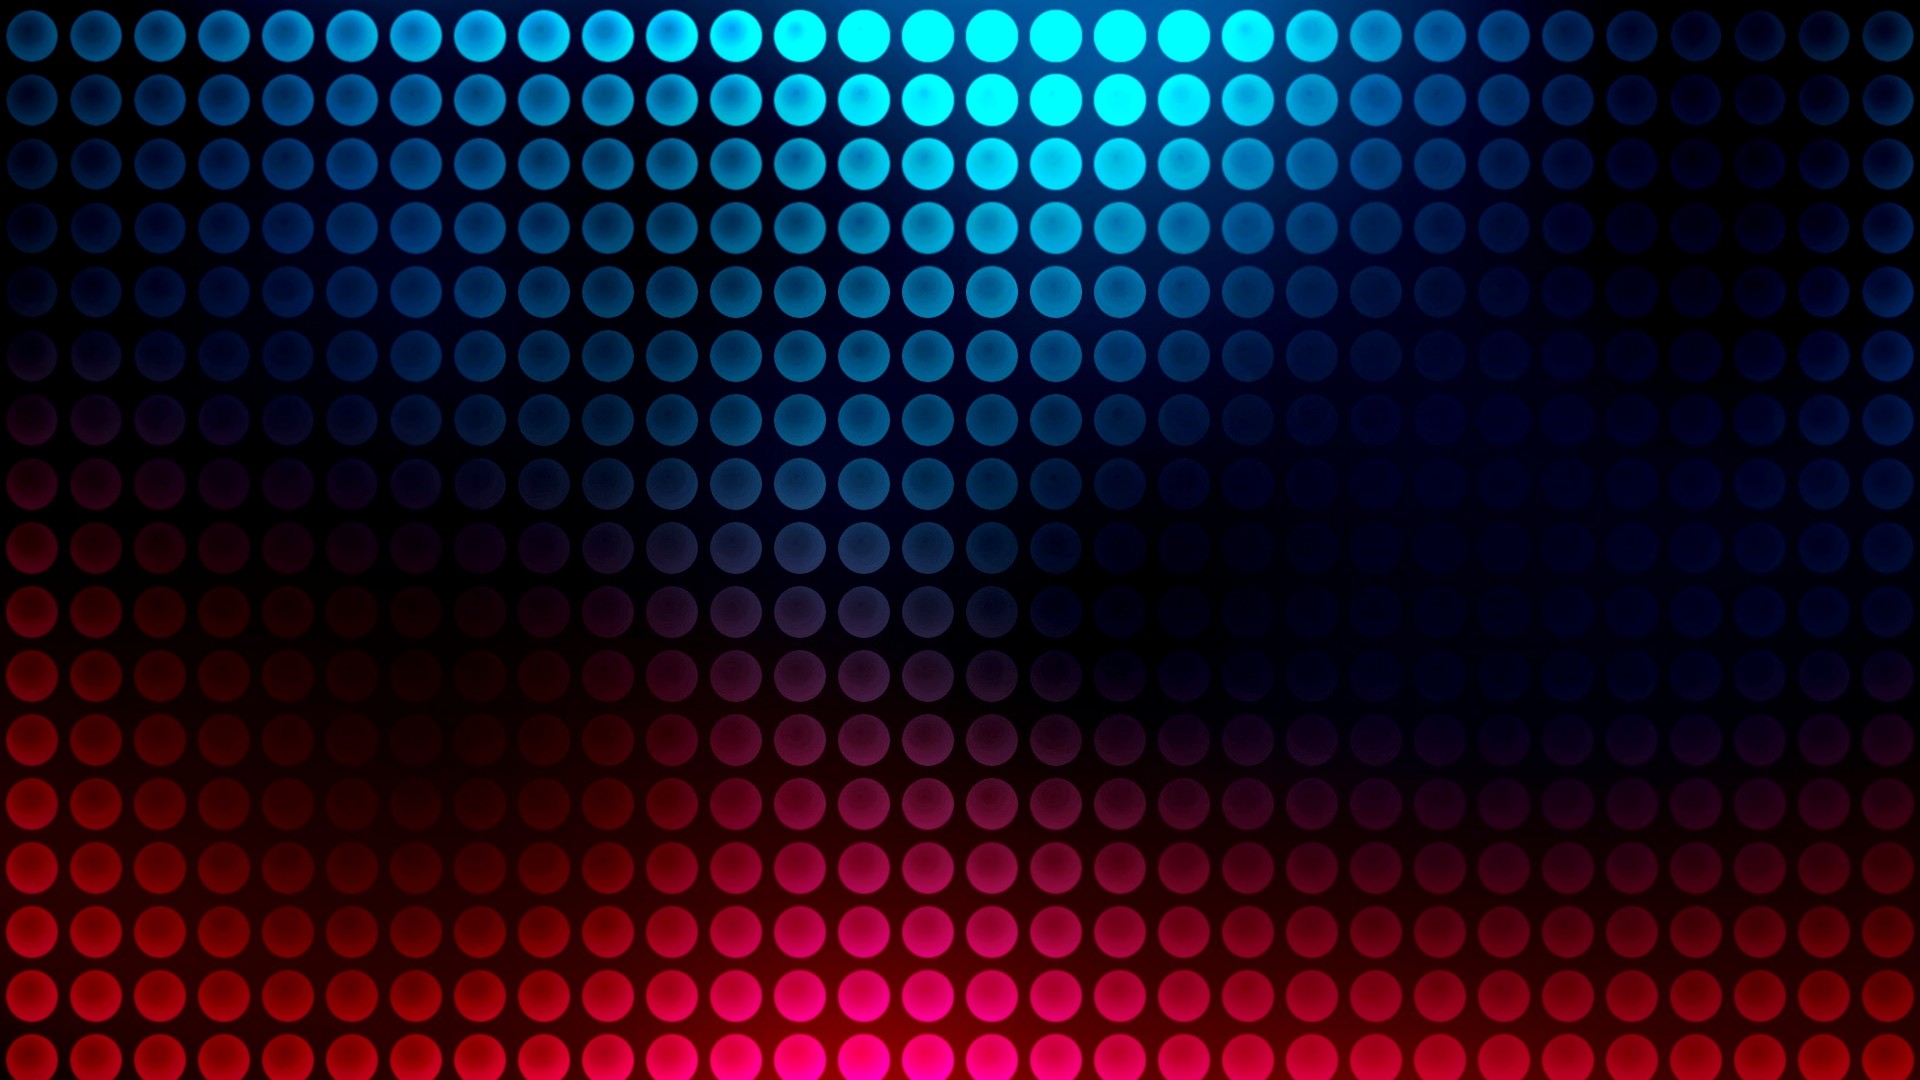 1920x1080, Free Download 1950s Wallpaper - Red And Blue Neon - HD Wallpaper 